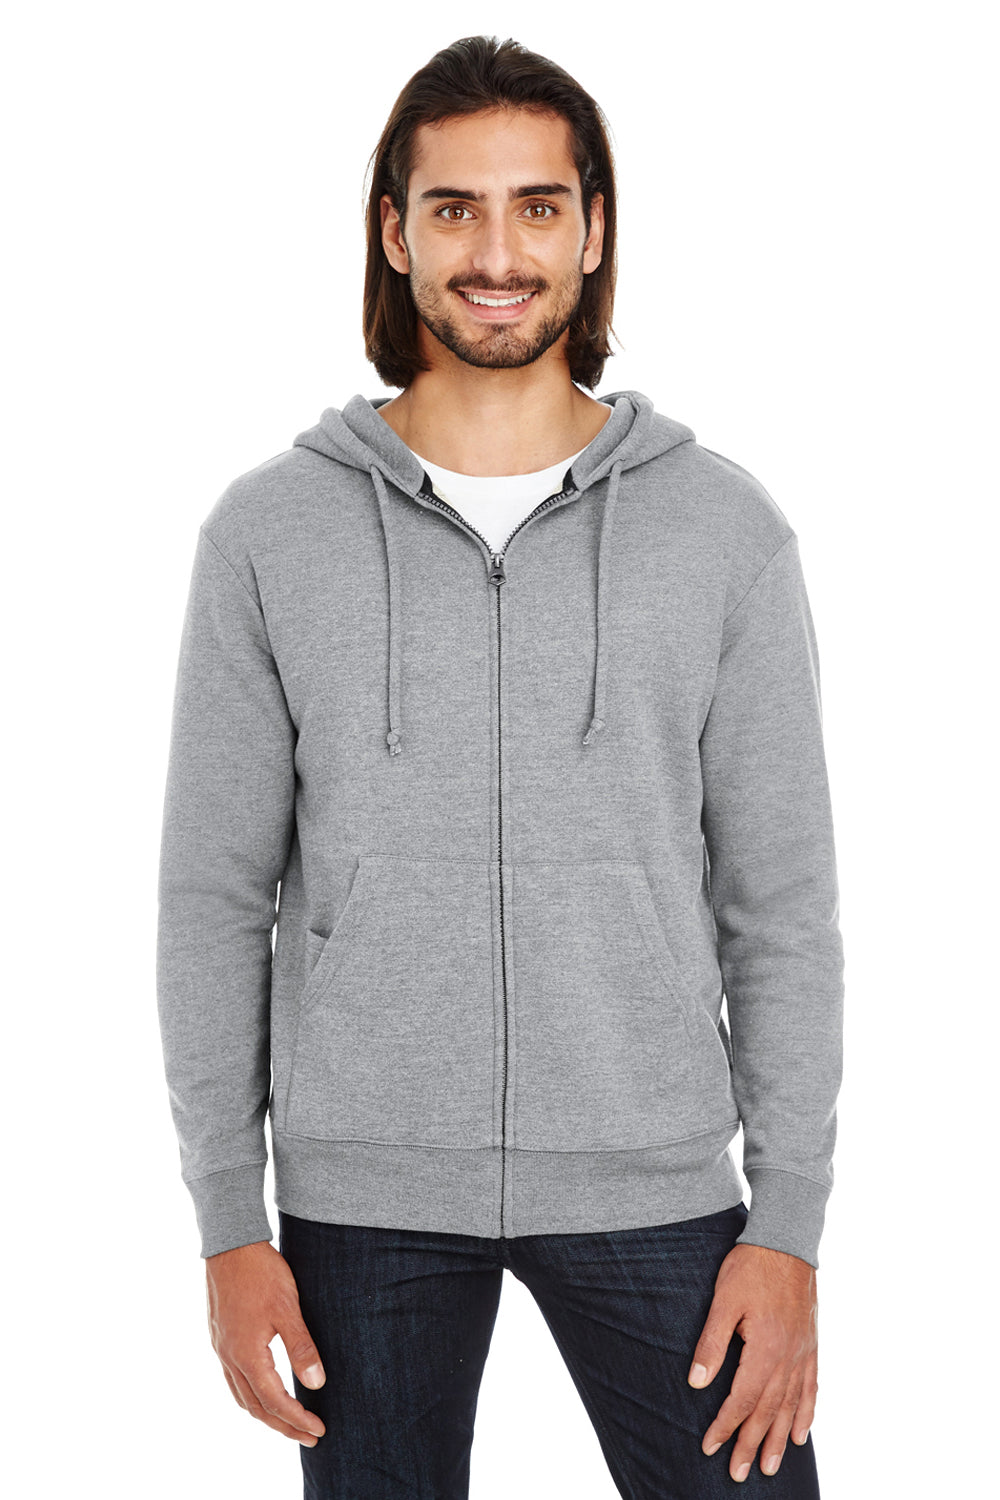 Threadfast Apparel 321Z Mens French Terry Full Zip Hooded Sweatshirt Hoodie Heather Charcoal Grey Front